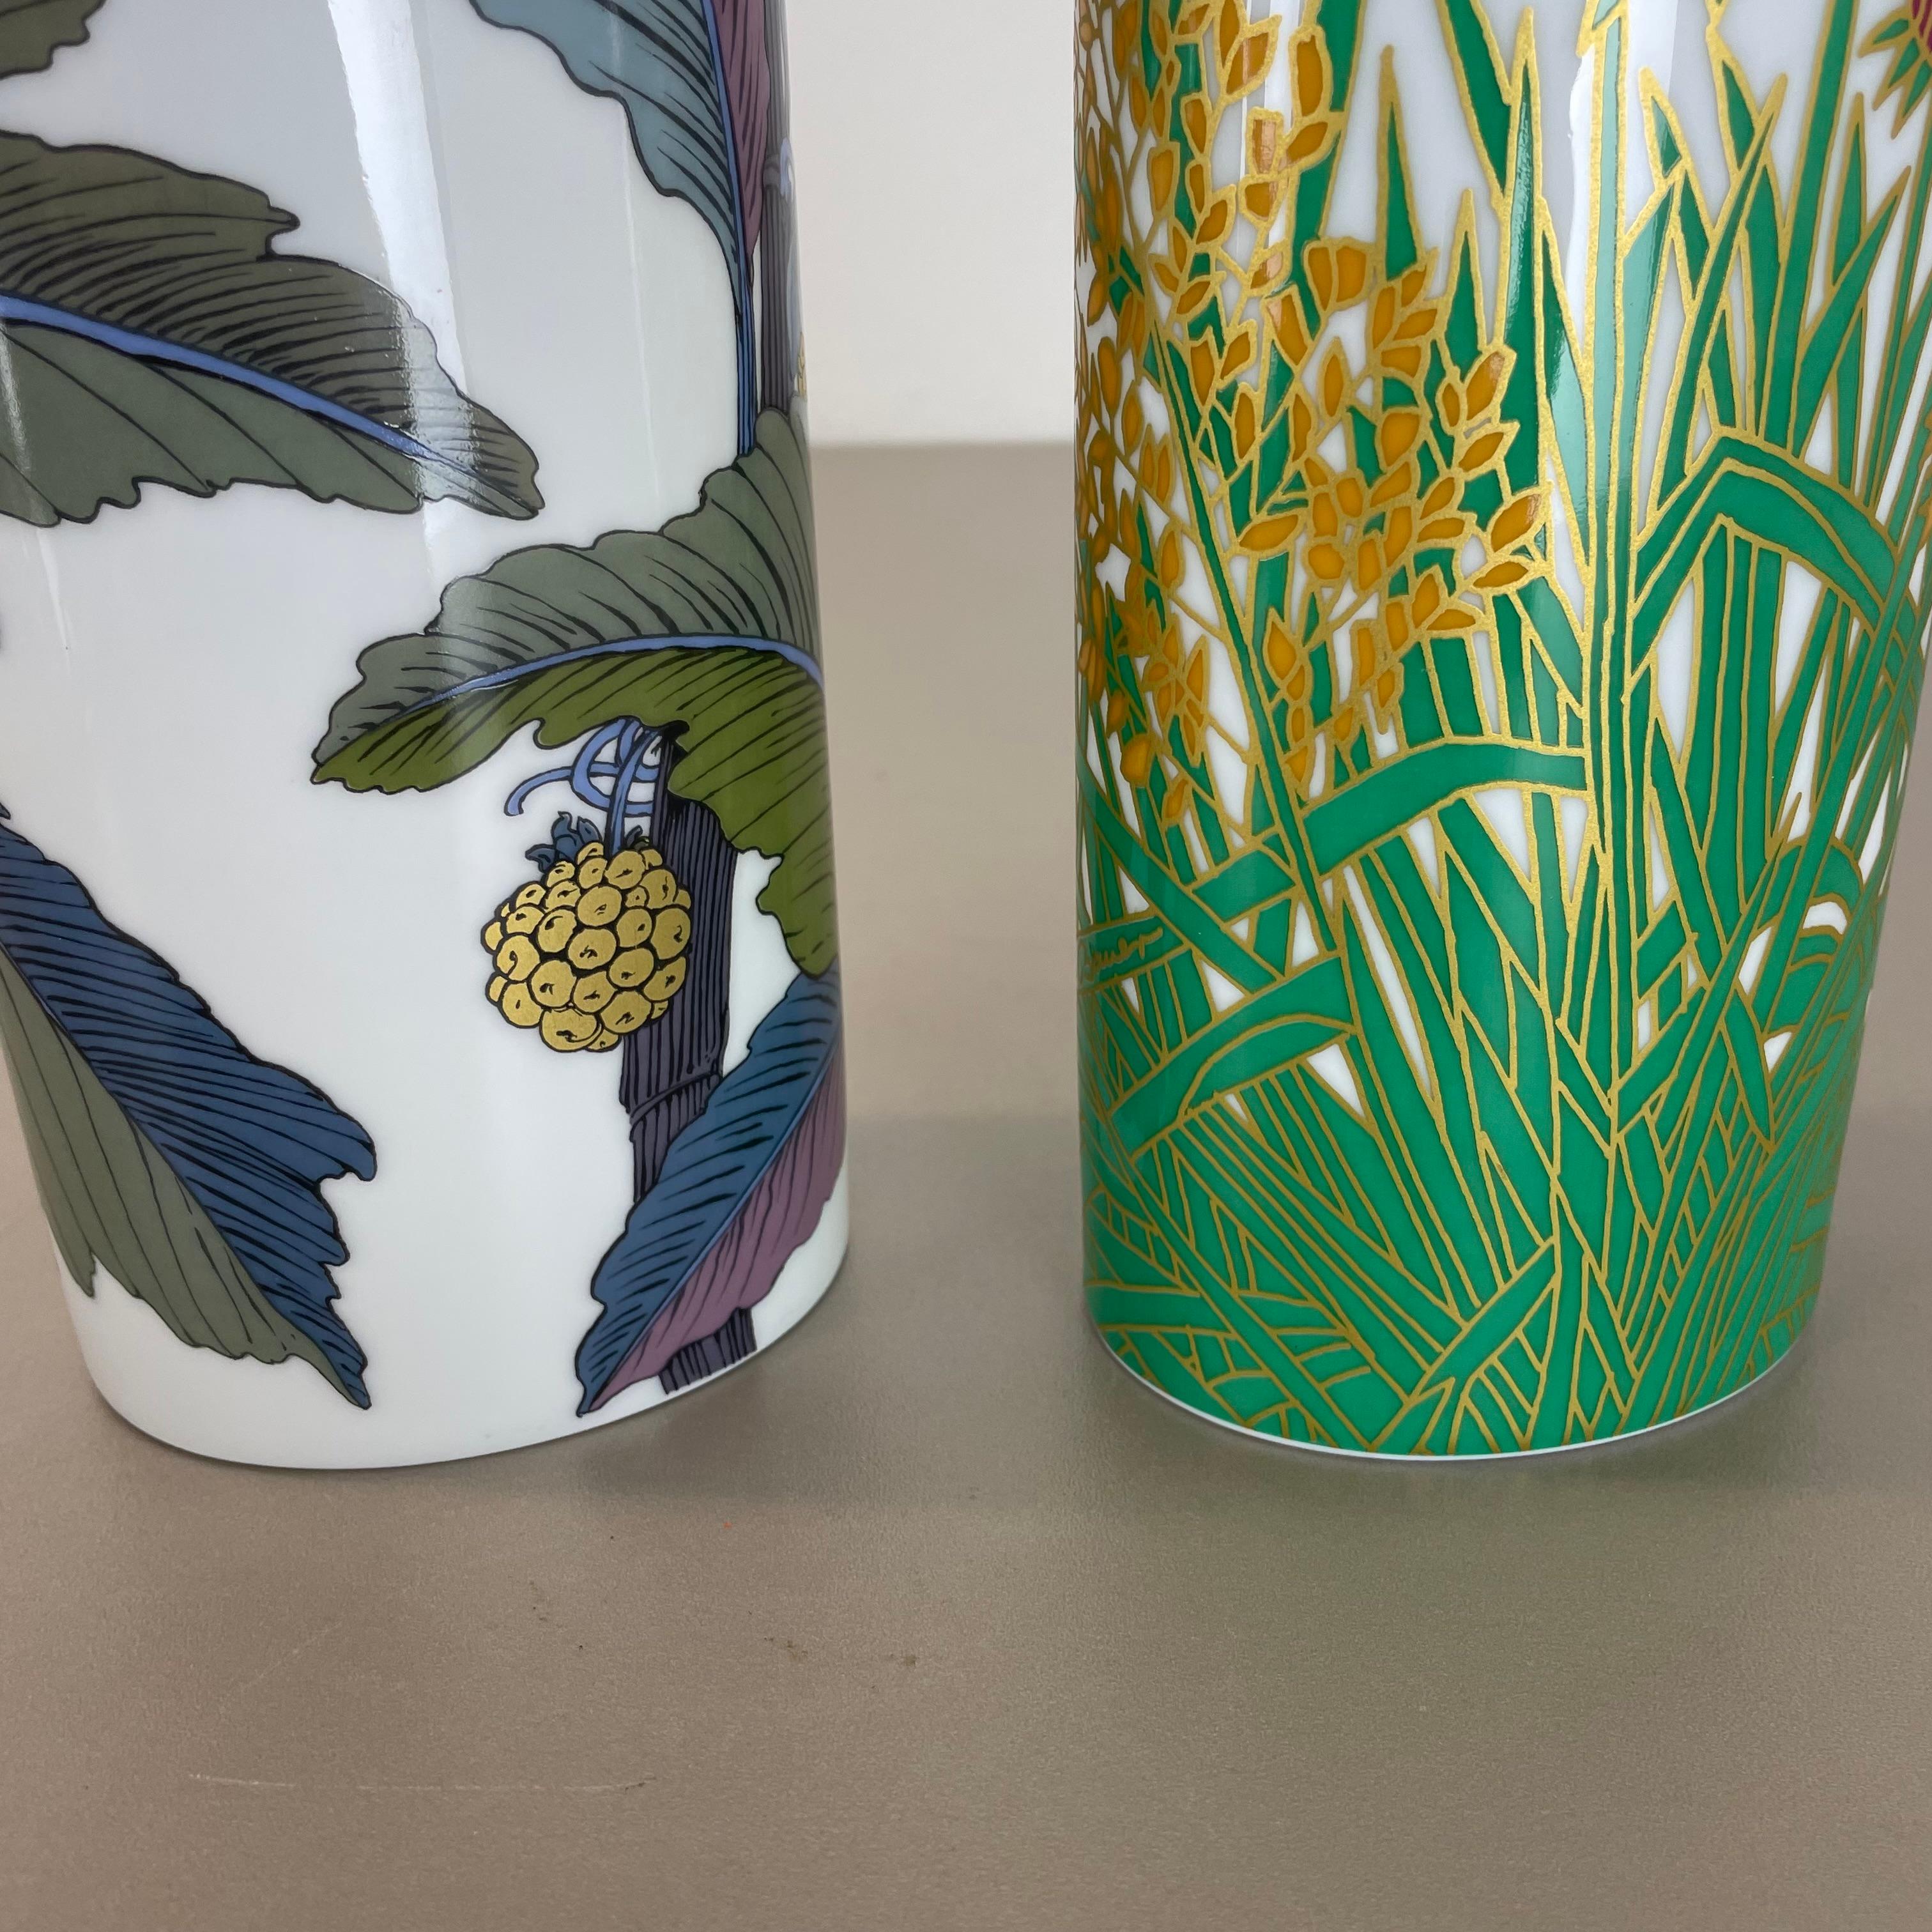 Set of 2 Floral Vases by W. Bauer and A. Le Foll for Rosenthal, Germany, 1980s For Sale 7